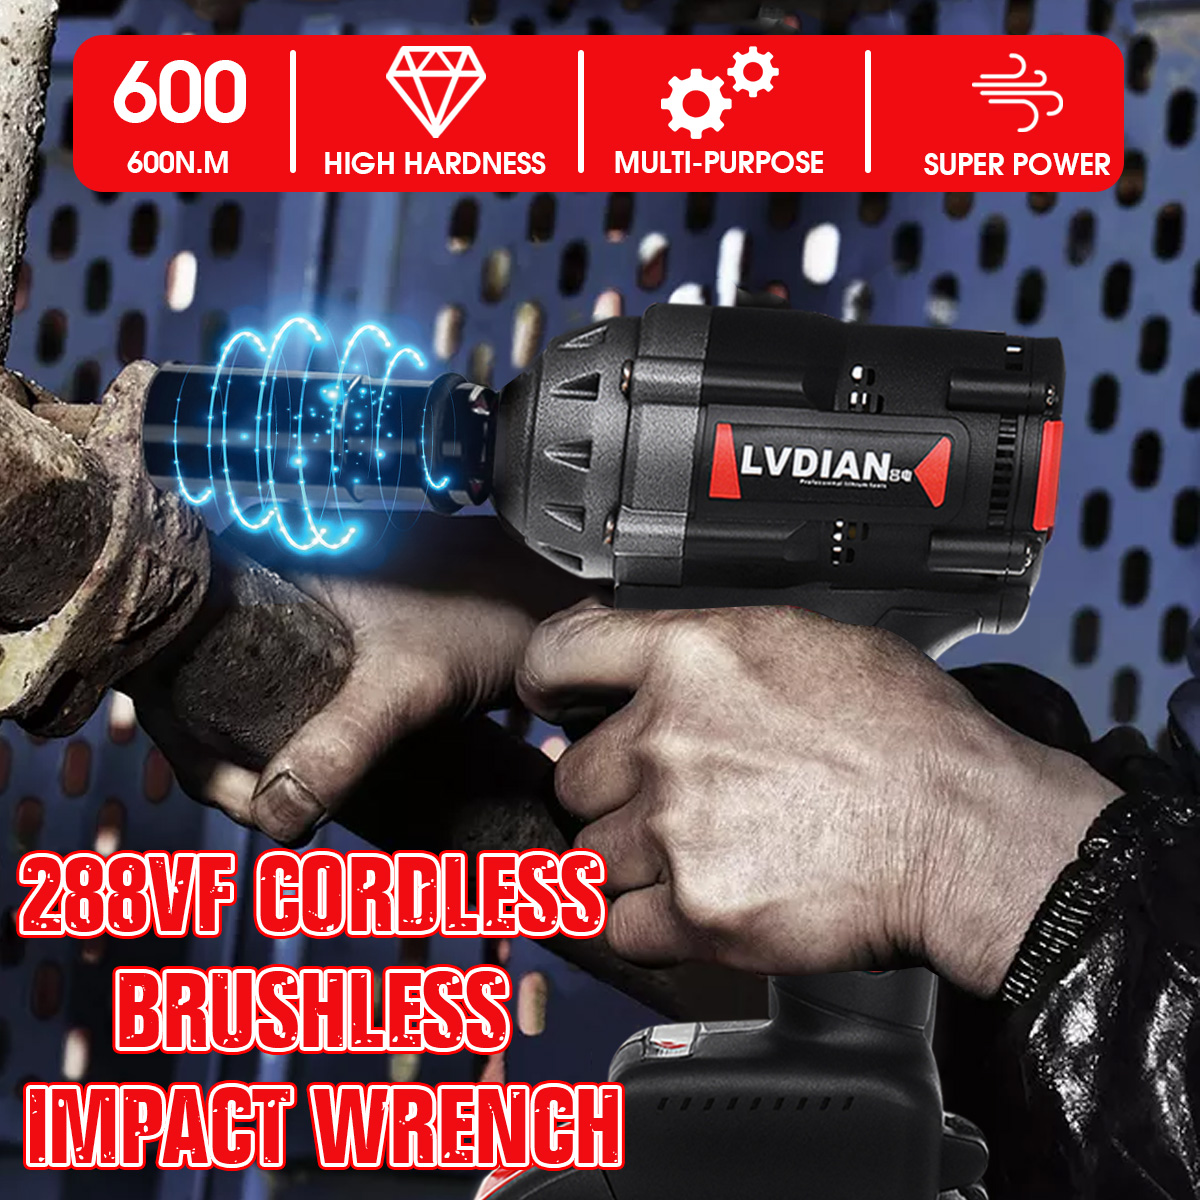 288VF 600N.M Max Brushless Impact Wrench Li-ion Battery Brushless Motor Electric Wrench Power Tool With Charger Sleeve